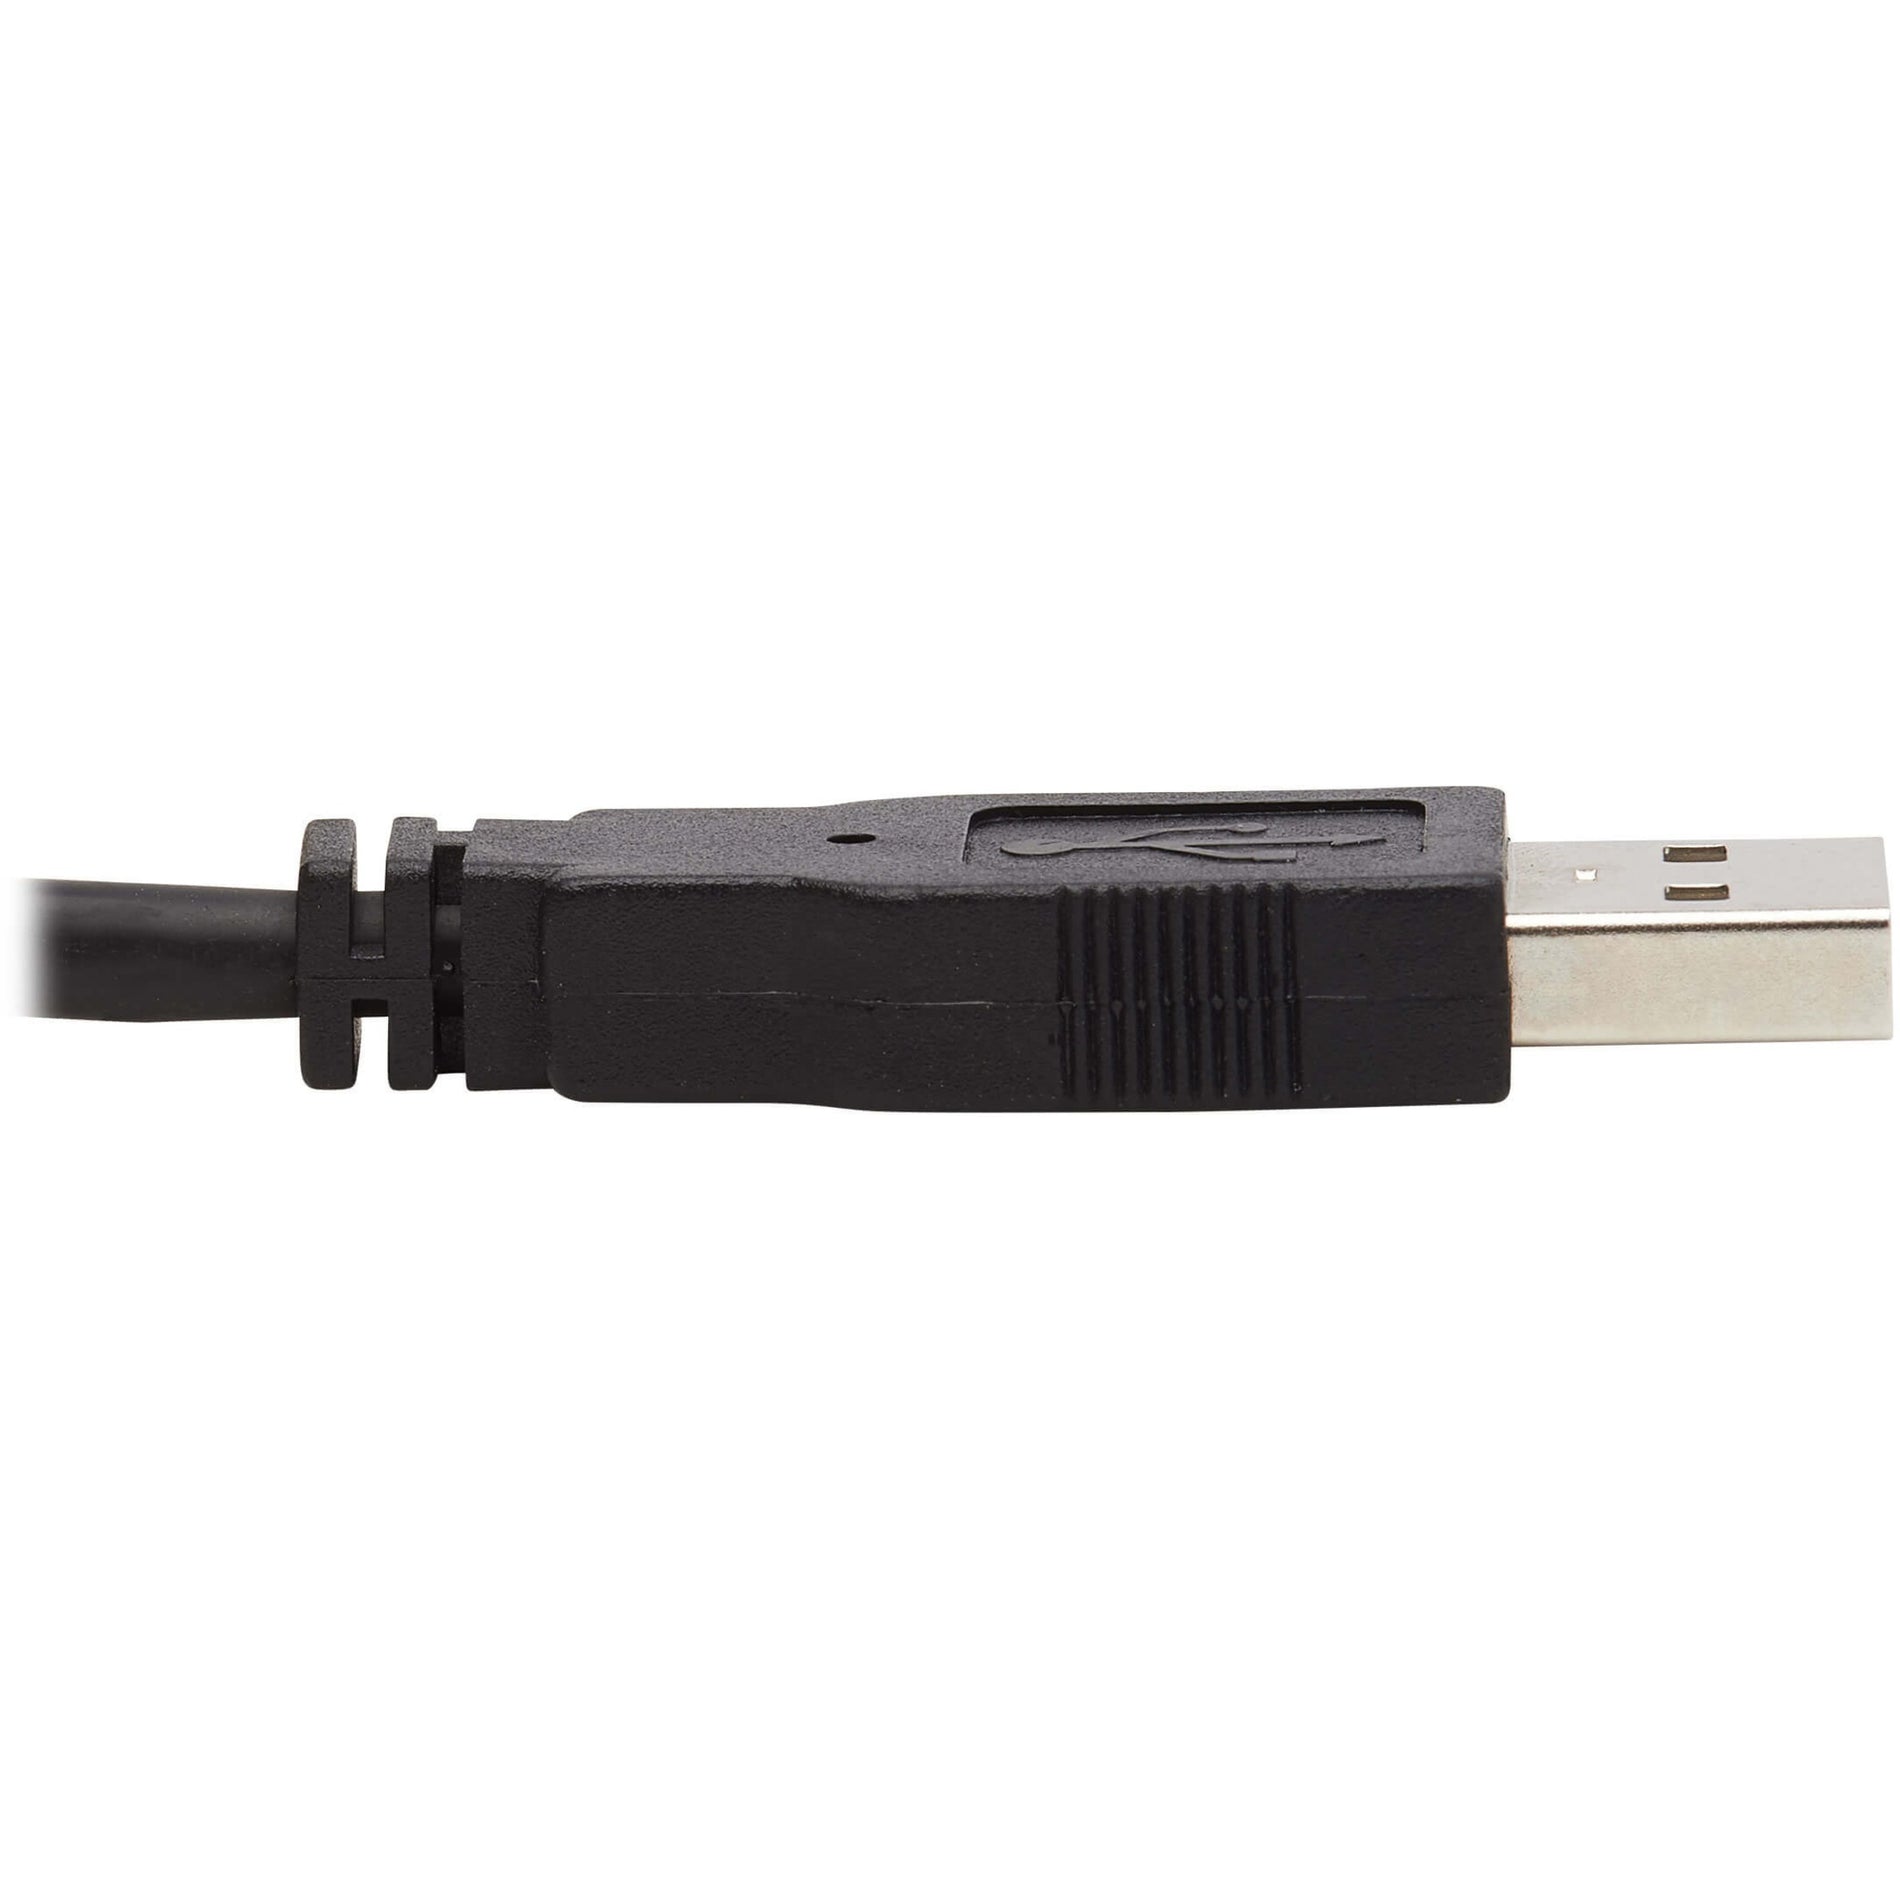 Tripp Lite P783-010-DPU KVM Cable Kit 4K USB 10FT, High-Quality DisplayPort and USB Cable for Monitors and KVM Switches